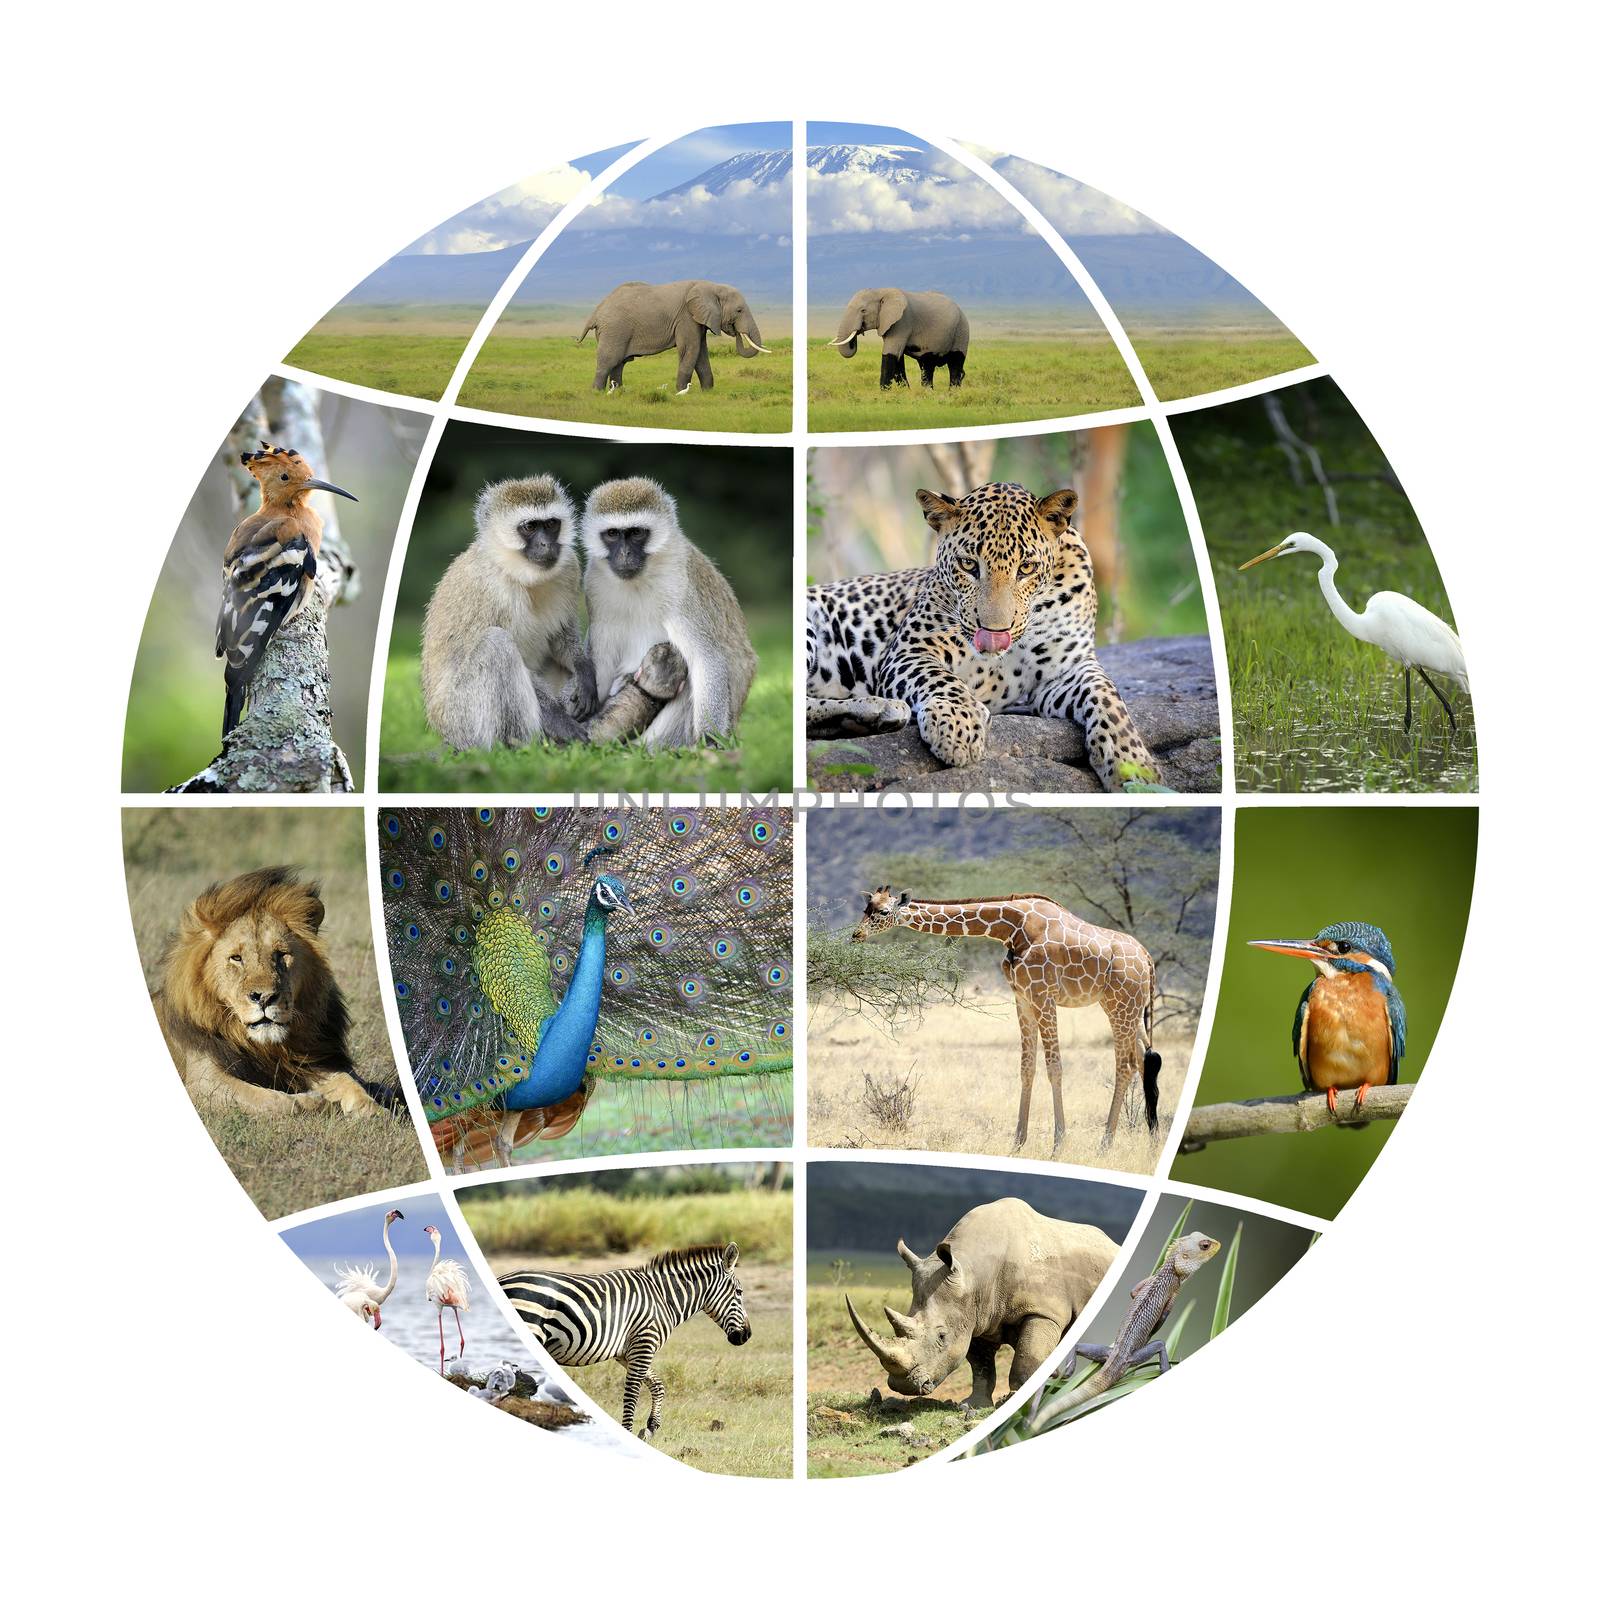 Globe design with photographs animals. Conceptual background